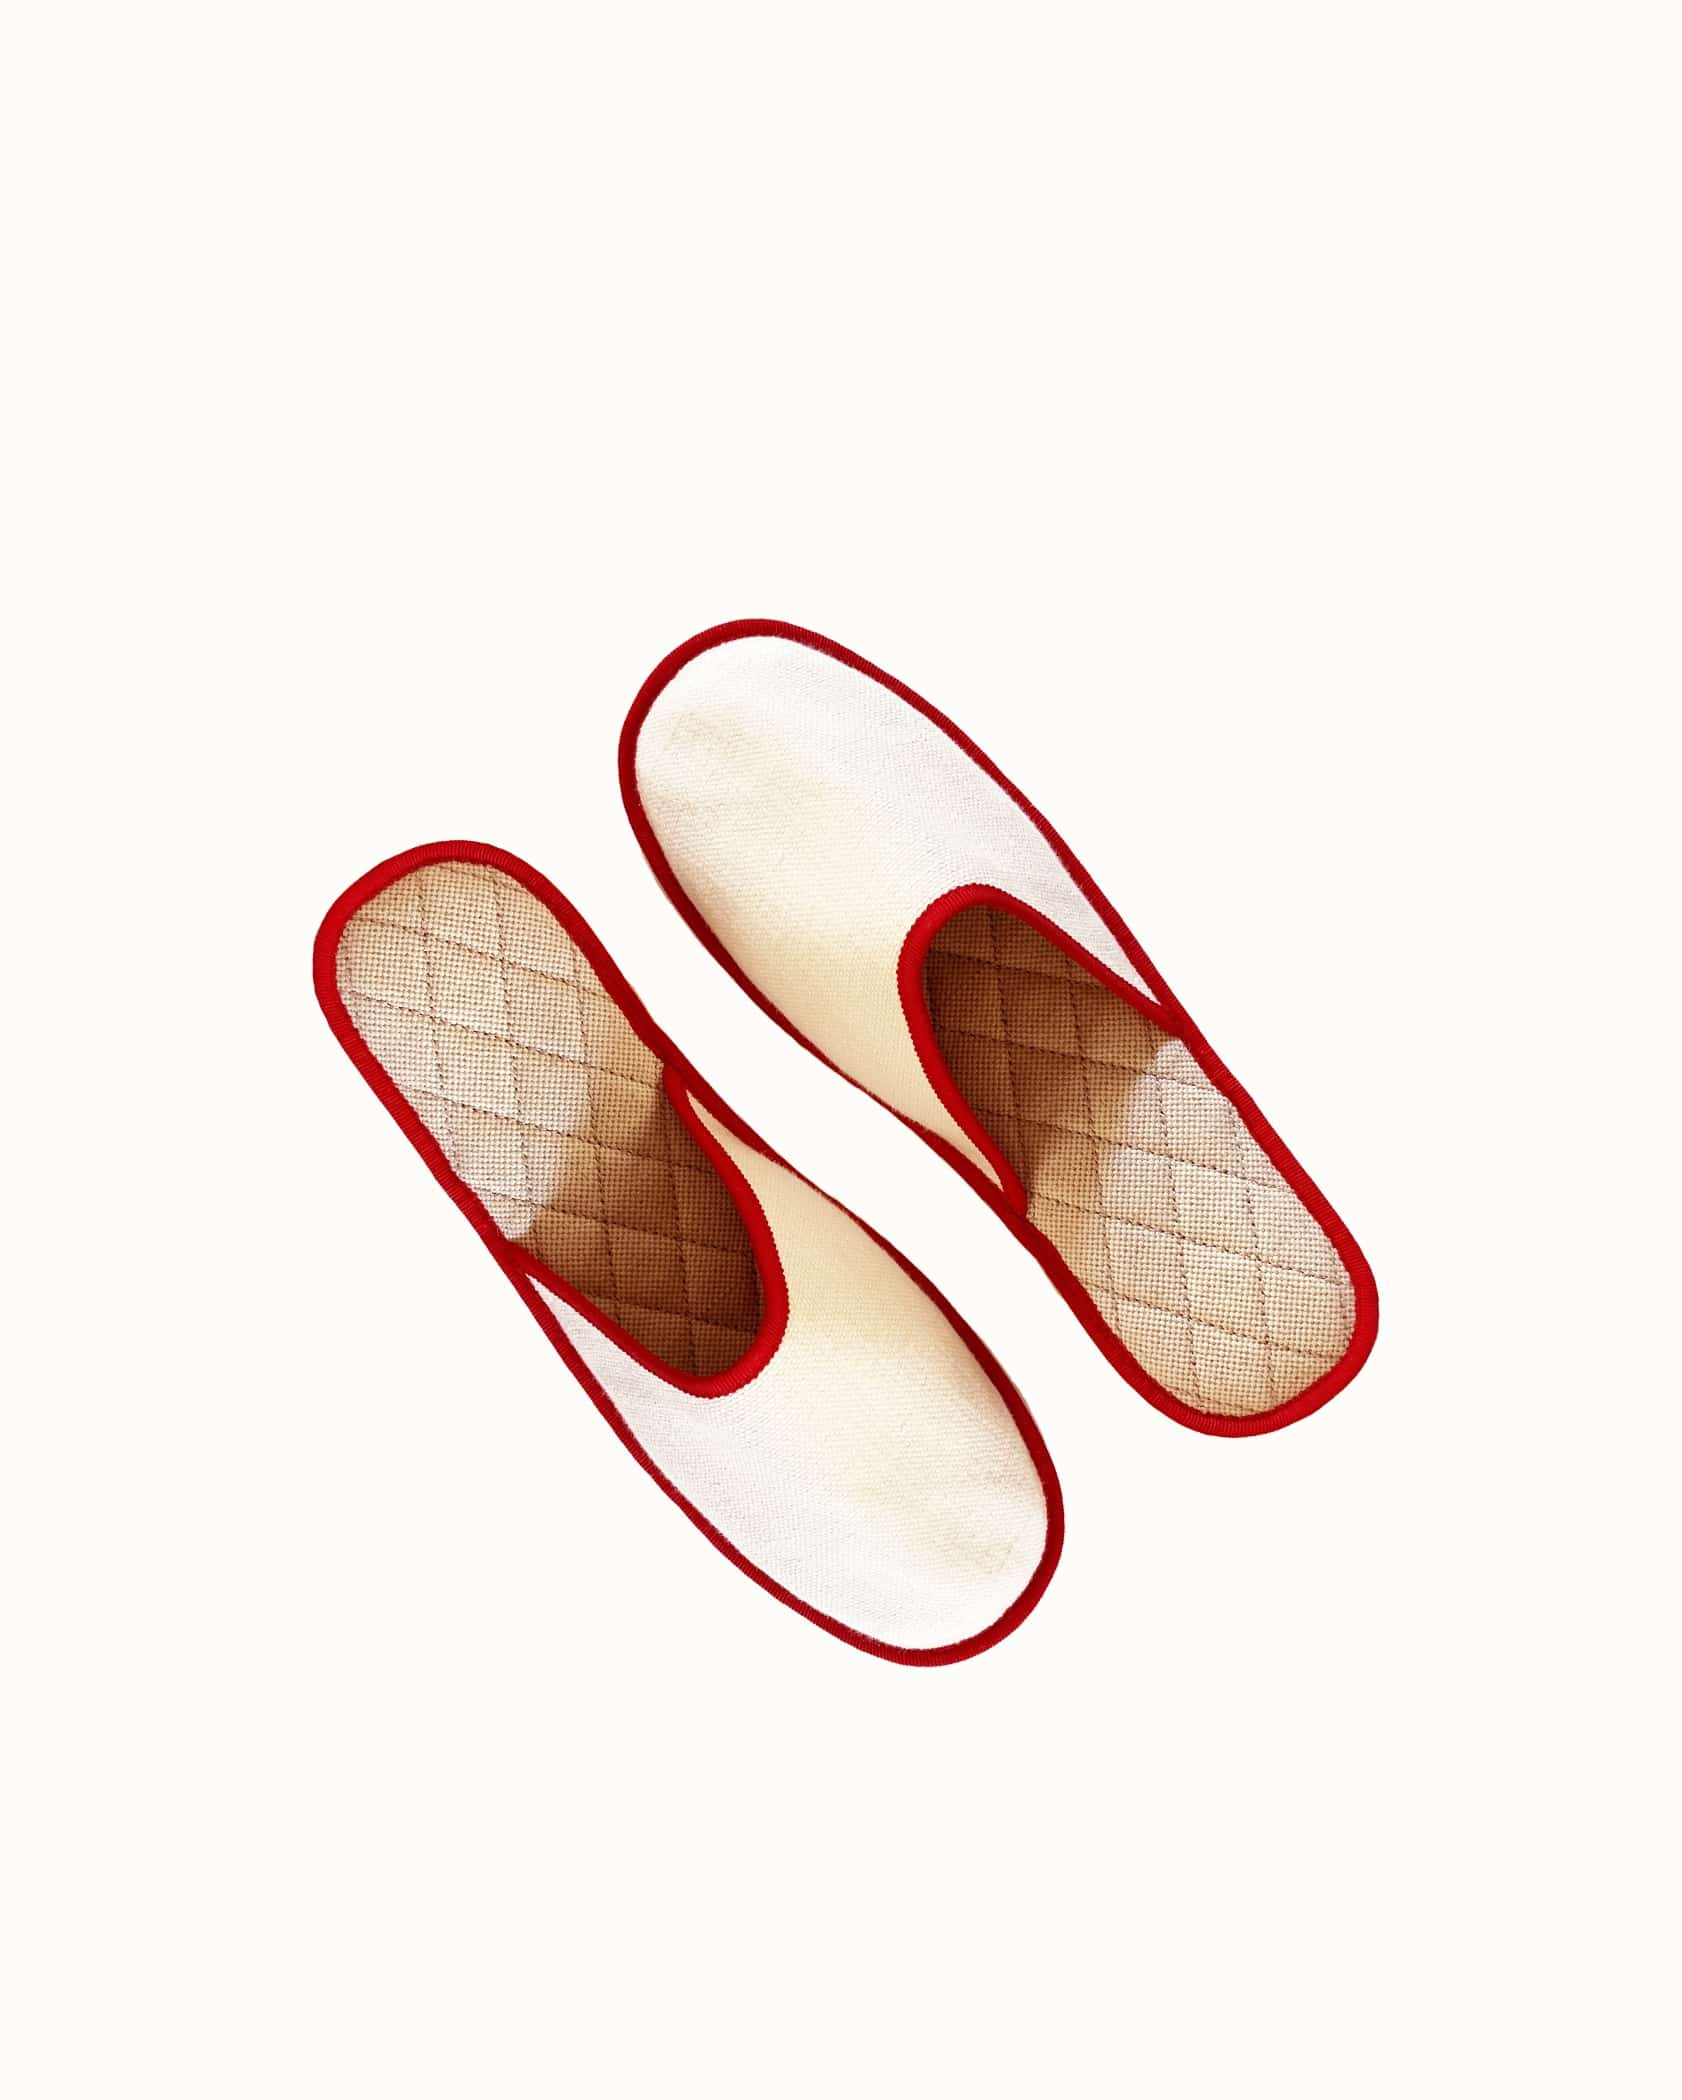 French slippers for men, women and kids. Le Spleen "Voiello", beige and red. A slip-on like hotel slippers with a quilted padding and an outstanding craftsmanship manufacturing. Made in France.